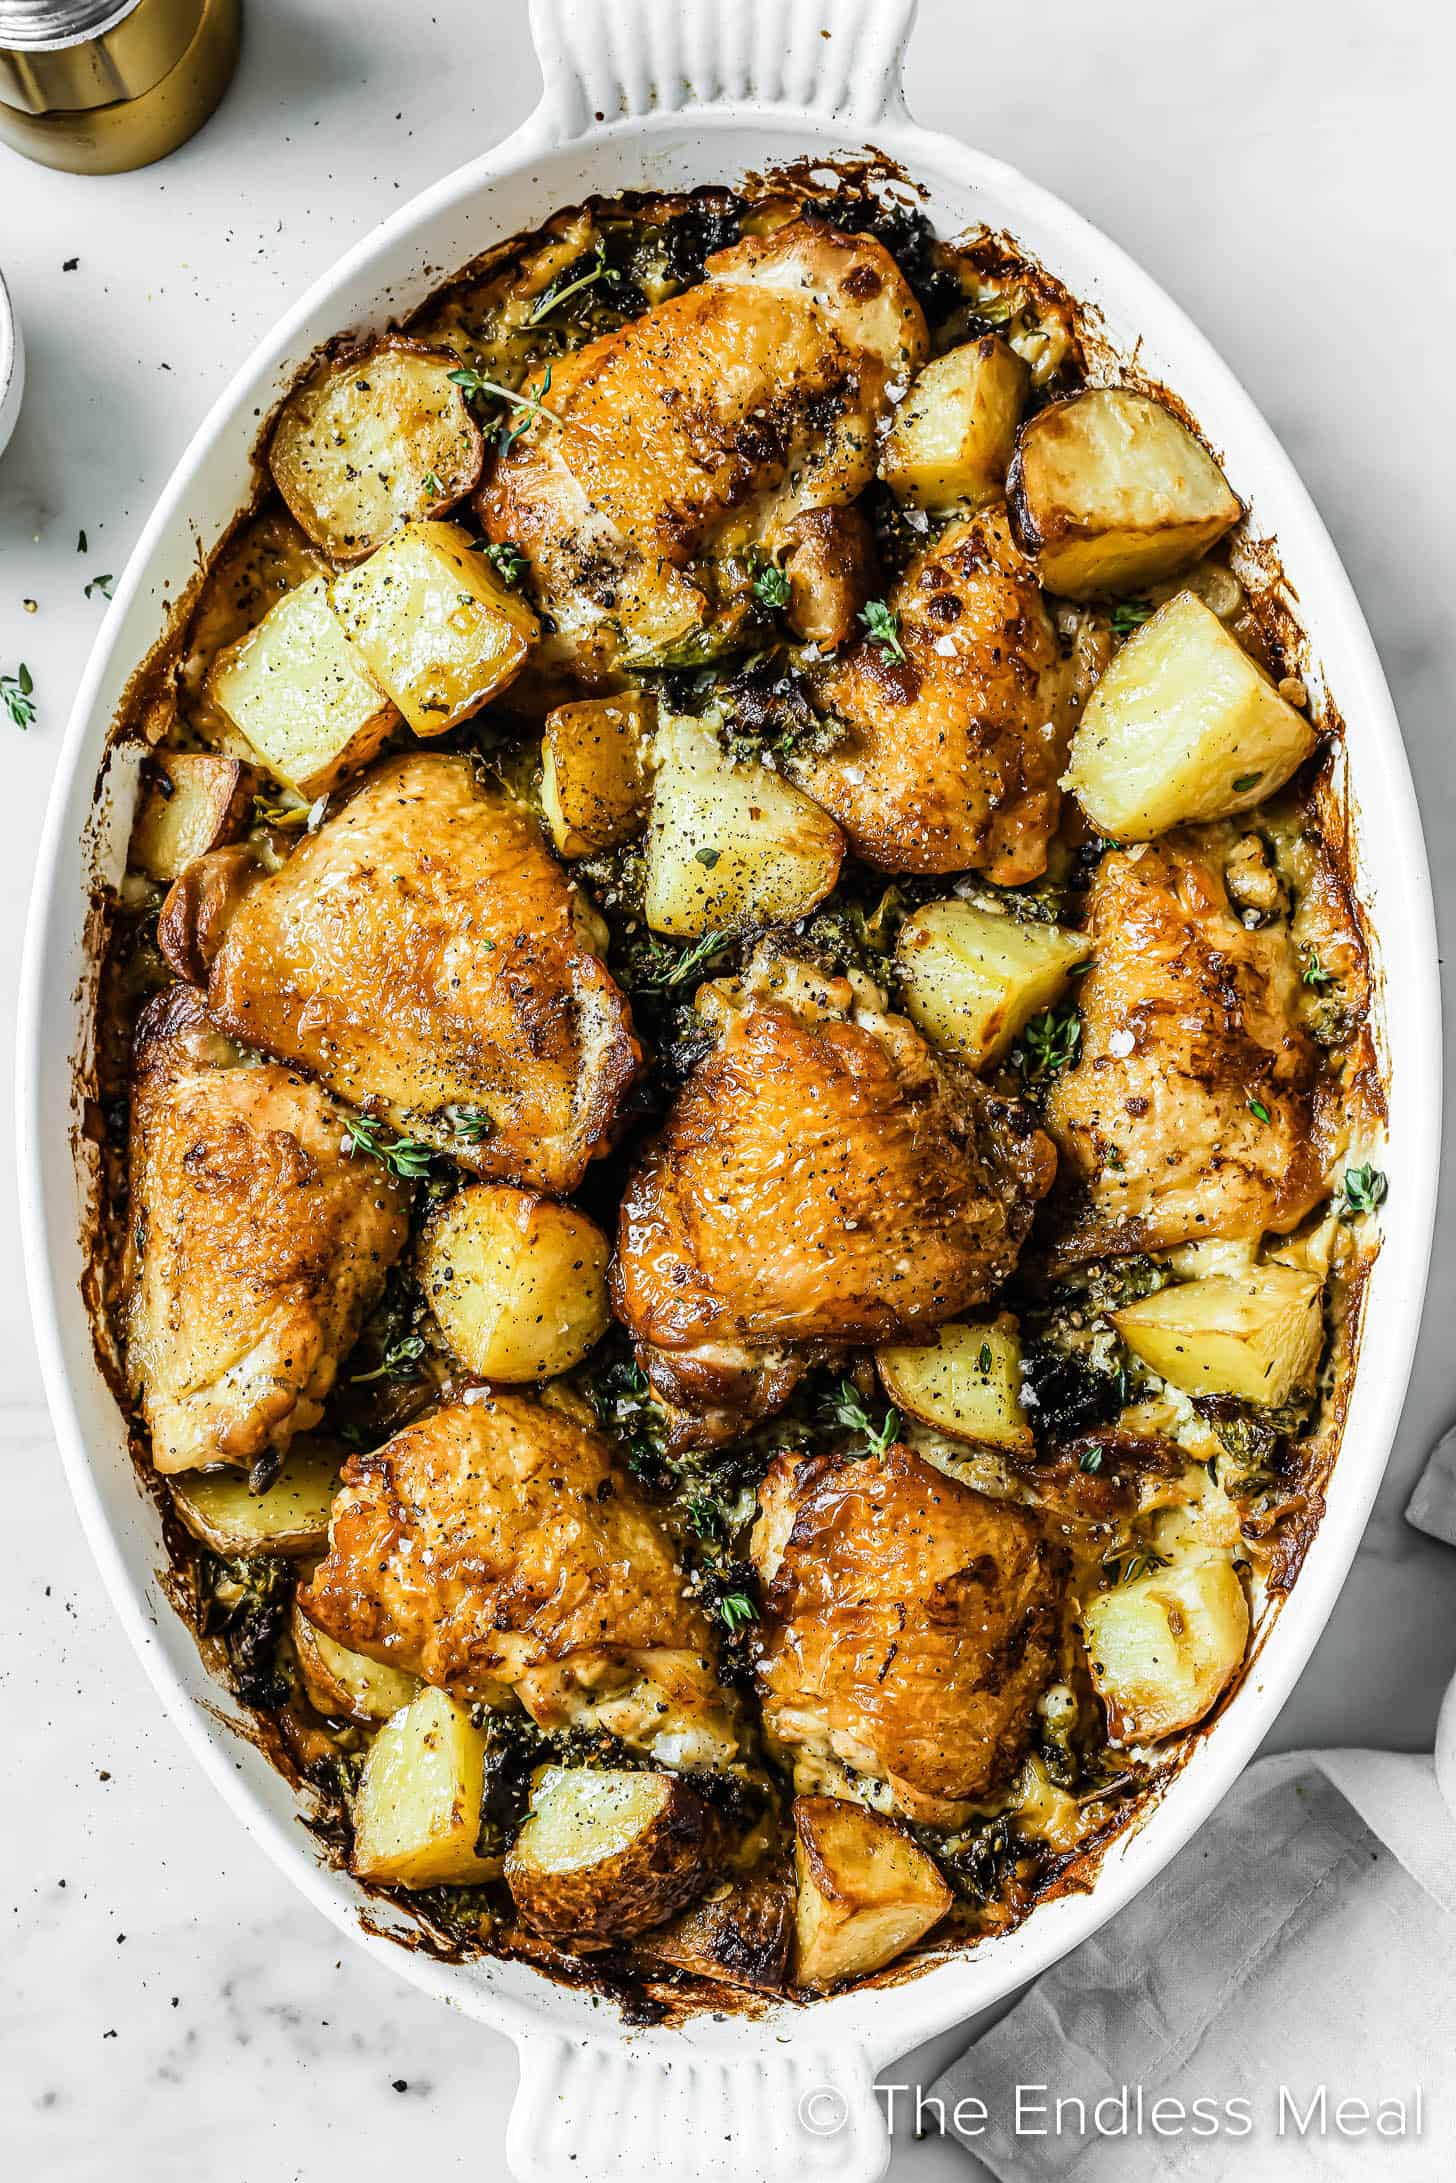 Looking down at au Gratin Potatoes and Chicken in a baking dish